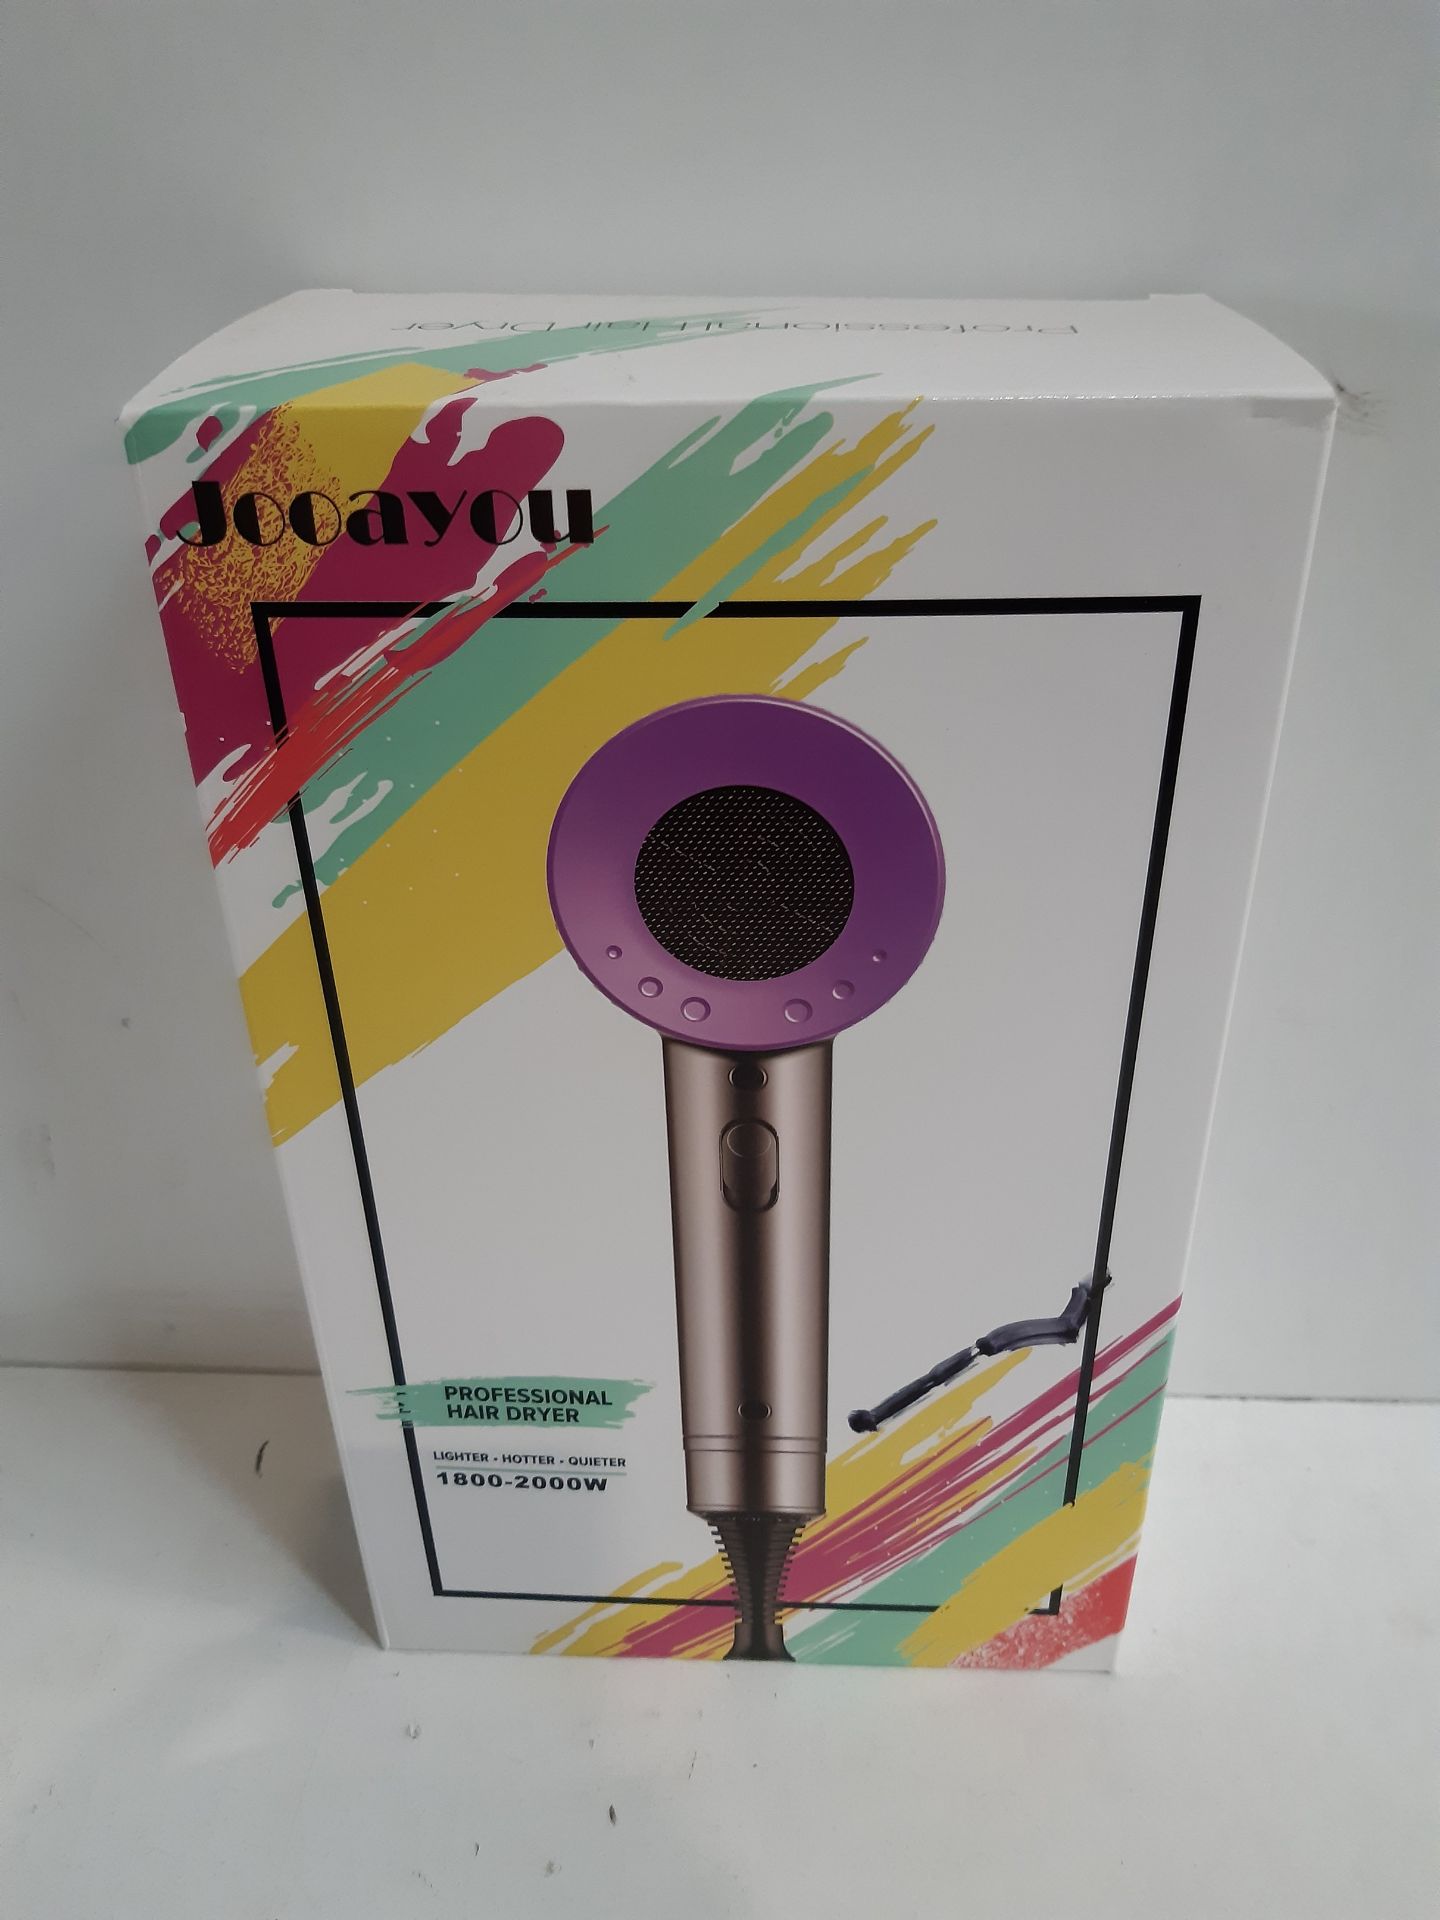 RRP £32.99 Jooayou Professional Hair Dryer 2000W Fast Dry Negative - Image 2 of 2